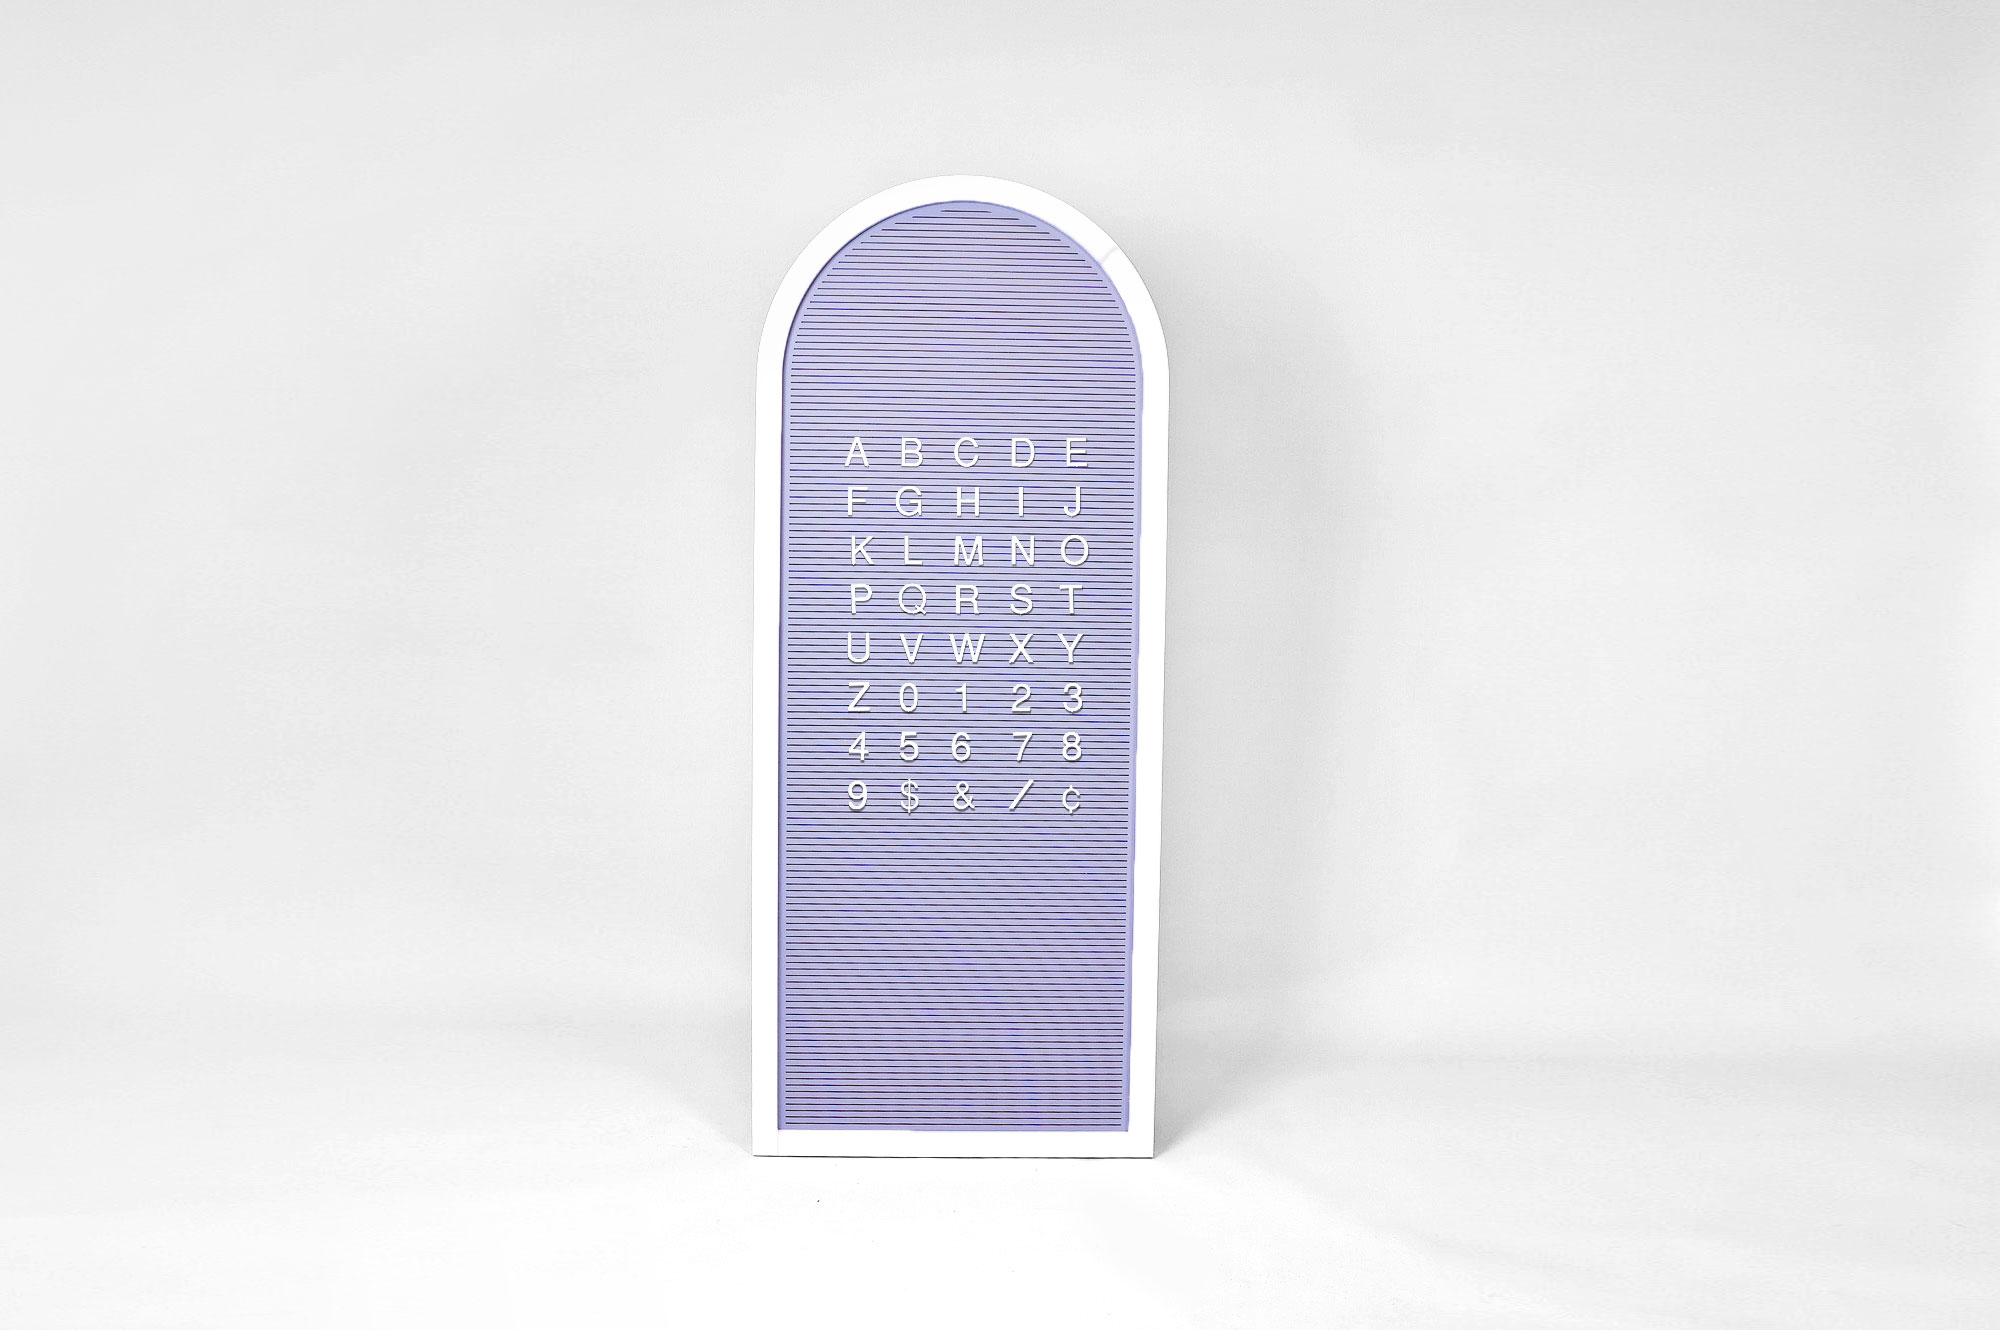 Custom purple changeable letterboard sign for Re:Store, a retail store and community space on Maiden Lane in San Francisco, CA.